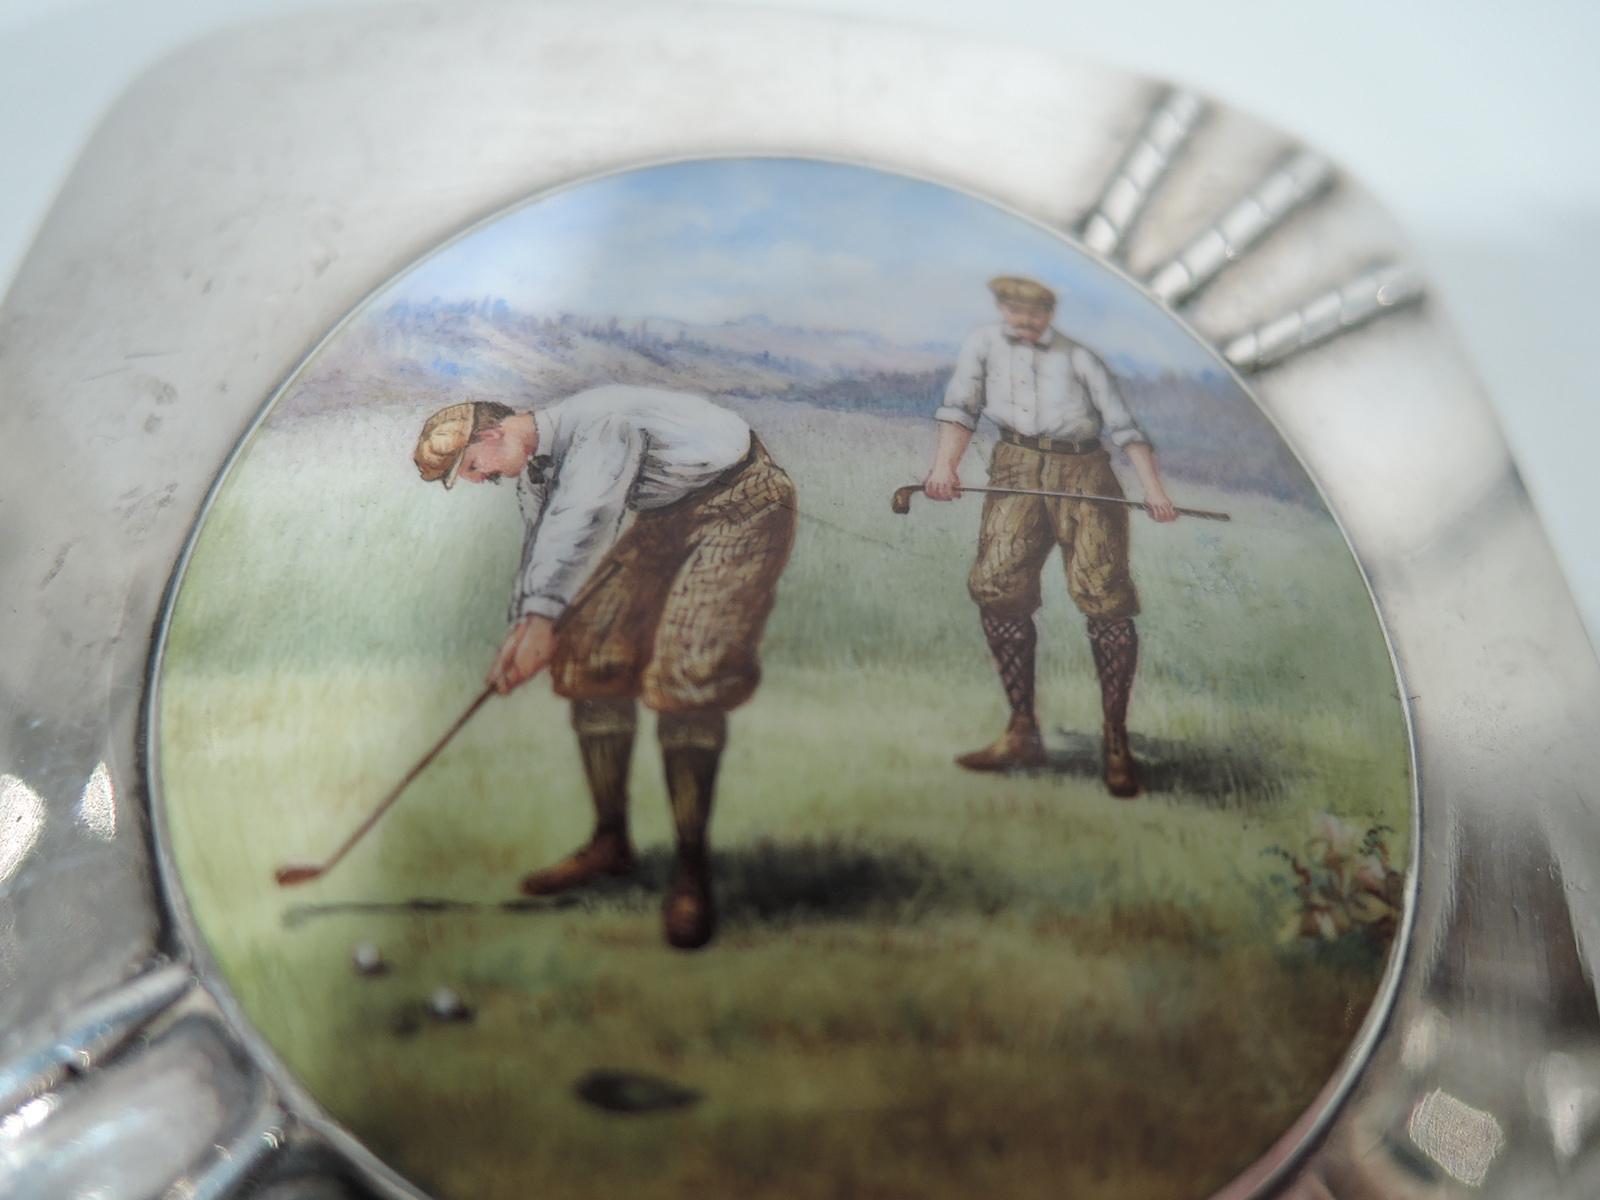 American Edwardian sterling silver and enamel cigarette case. Squarish with curved corners. Cover inset with three applied clubs and central enamel painting depicting a pair of stooped and concentrated golfers in plus-fours and flat caps